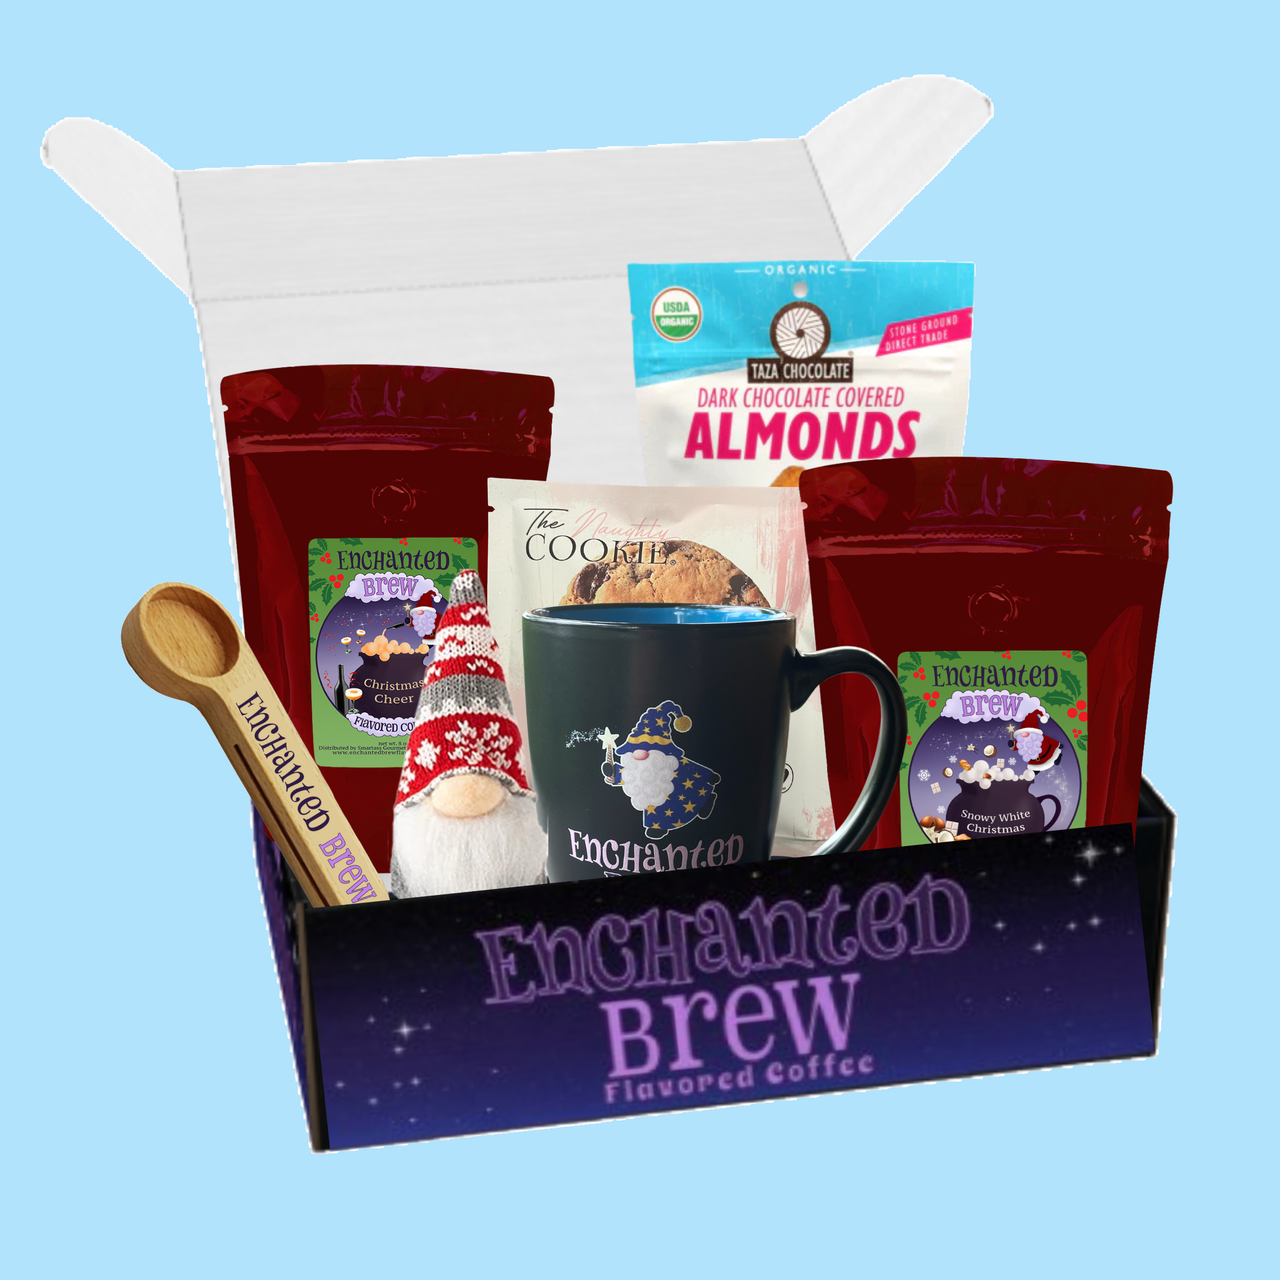 Christmas Spirit! Flavored Coffee Christmas Gift Box w/Treats & Accessories  - Perfect Christmas Present for Coffee Lovers! - FREE SHIPPING!